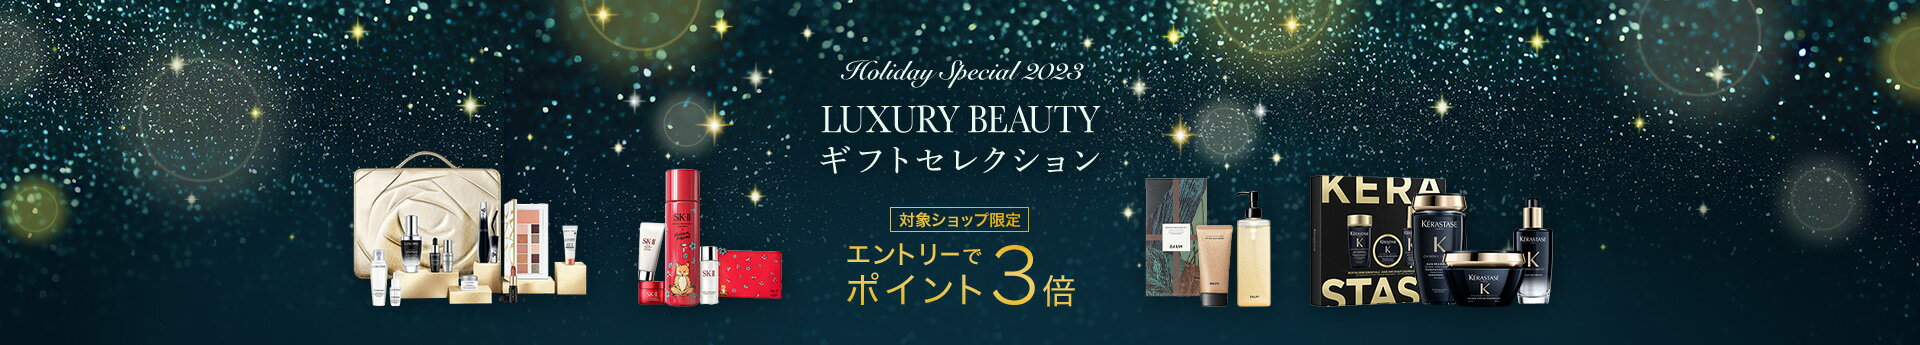 LUXURY BEAUTY ギフトセレクション HOLIDAY SPECIAL 2023（クリスマスコフレ＆限定コスメ）